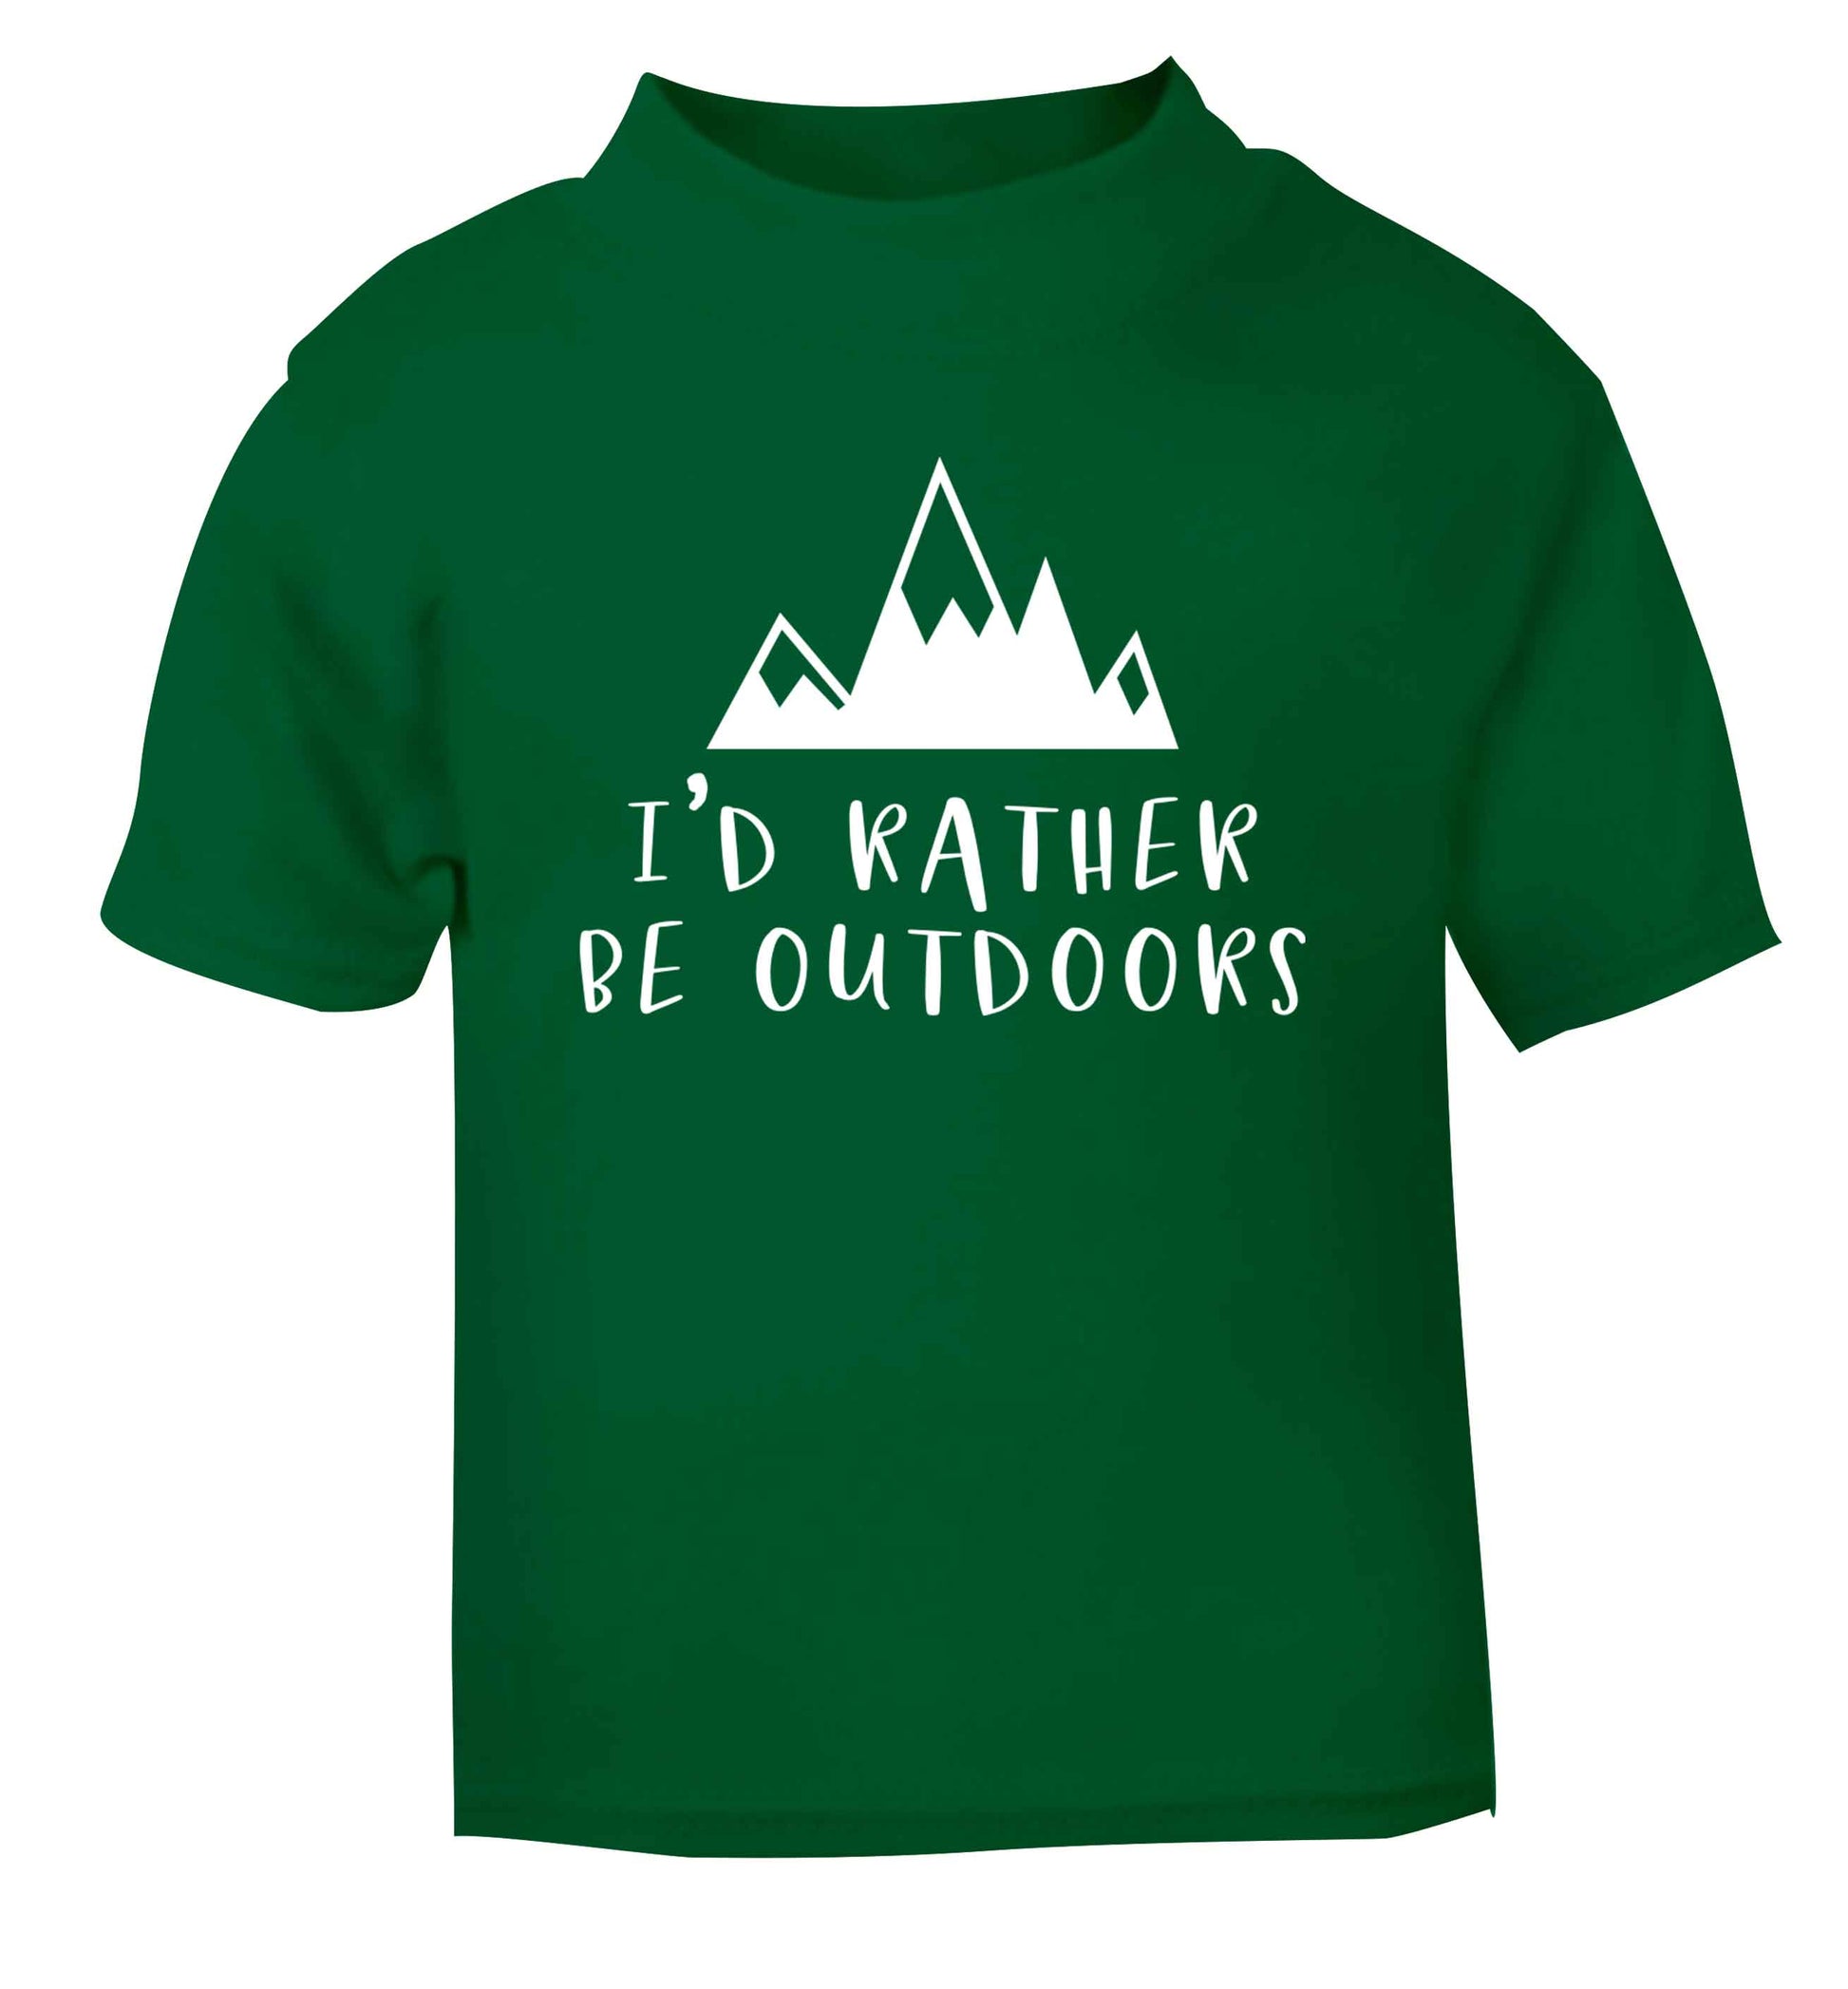 I'd rather be outdoors green Baby Toddler Tshirt 2 Years